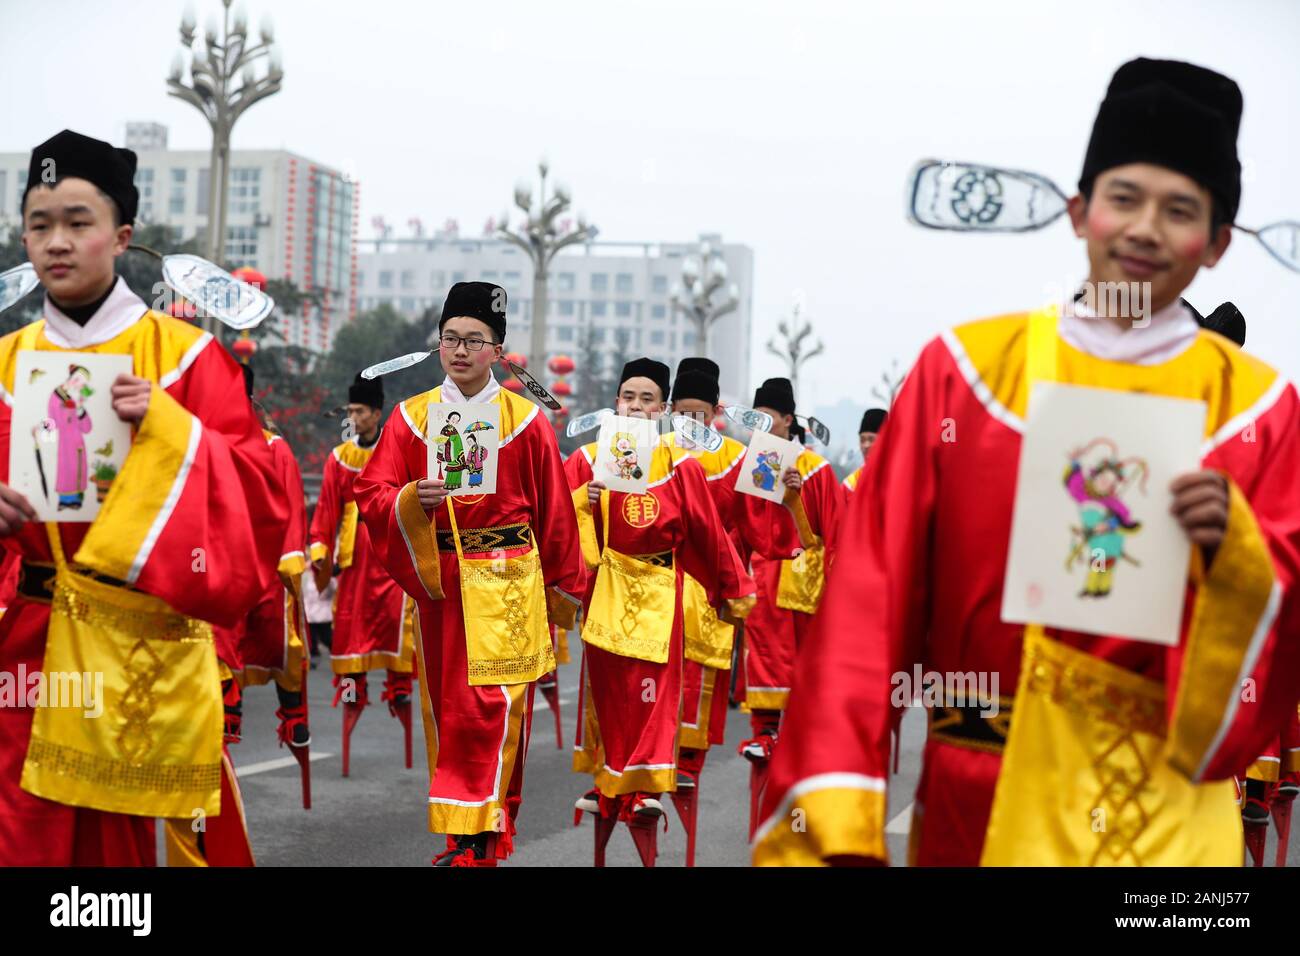 Mianzhu, China's Sichuan Province. 17th Jan, 2020. Paraders in costumes hold traditional New Year paintings while walking on stilts during the 19th Mianzhu New Year Painting Festival in the city of Mianzhu, southwest China's Sichuan Province, Jan. 17, 2020. Credit: Jiang Hongjing/Xinhua/Alamy Live News Stock Photo